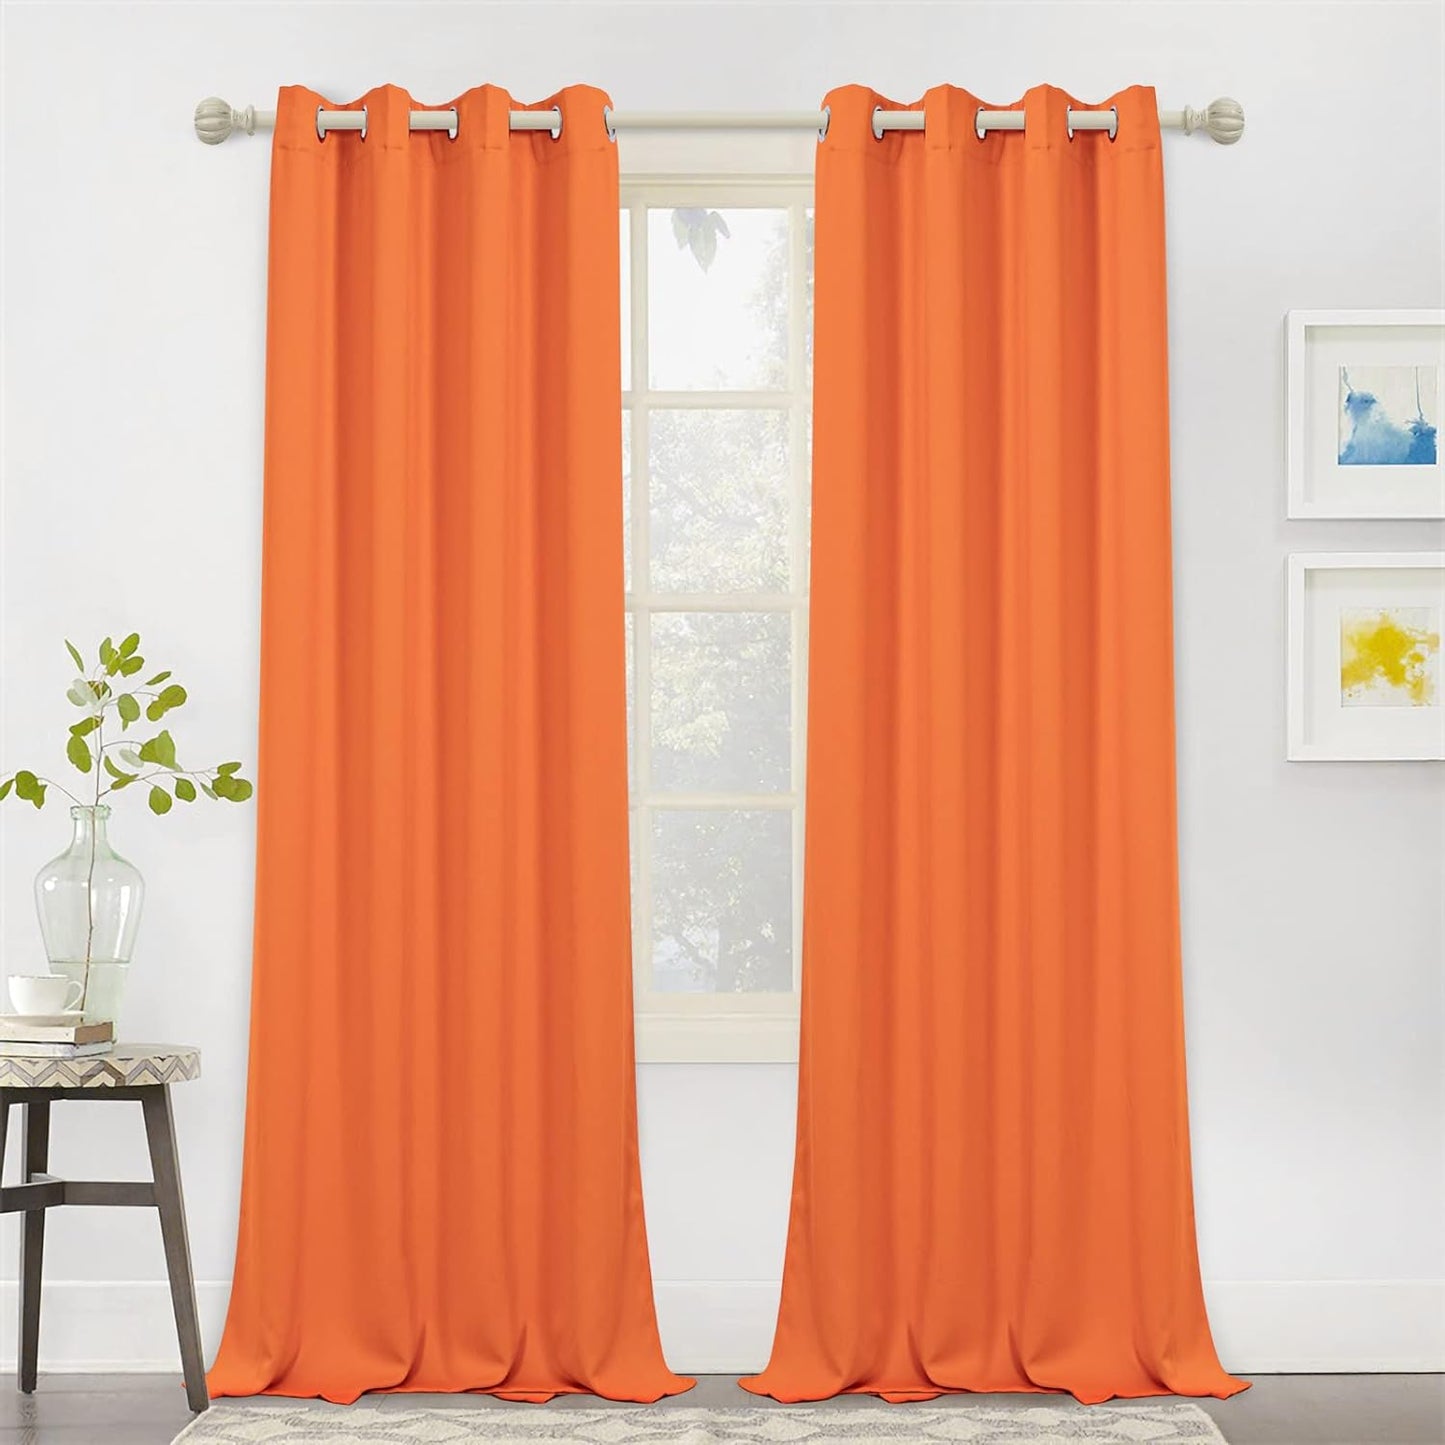 MYSKY HOME Black Curtains for Bedroom 90 Inch Long Blackout Curtains for Living Room 2 Panels Thermal Insulated Grommet Room Darkening Curtains Privacy Protect Window Drapes, 52 X 90 Inches, Black  MYSKY HOME Orange 52W X 90L 